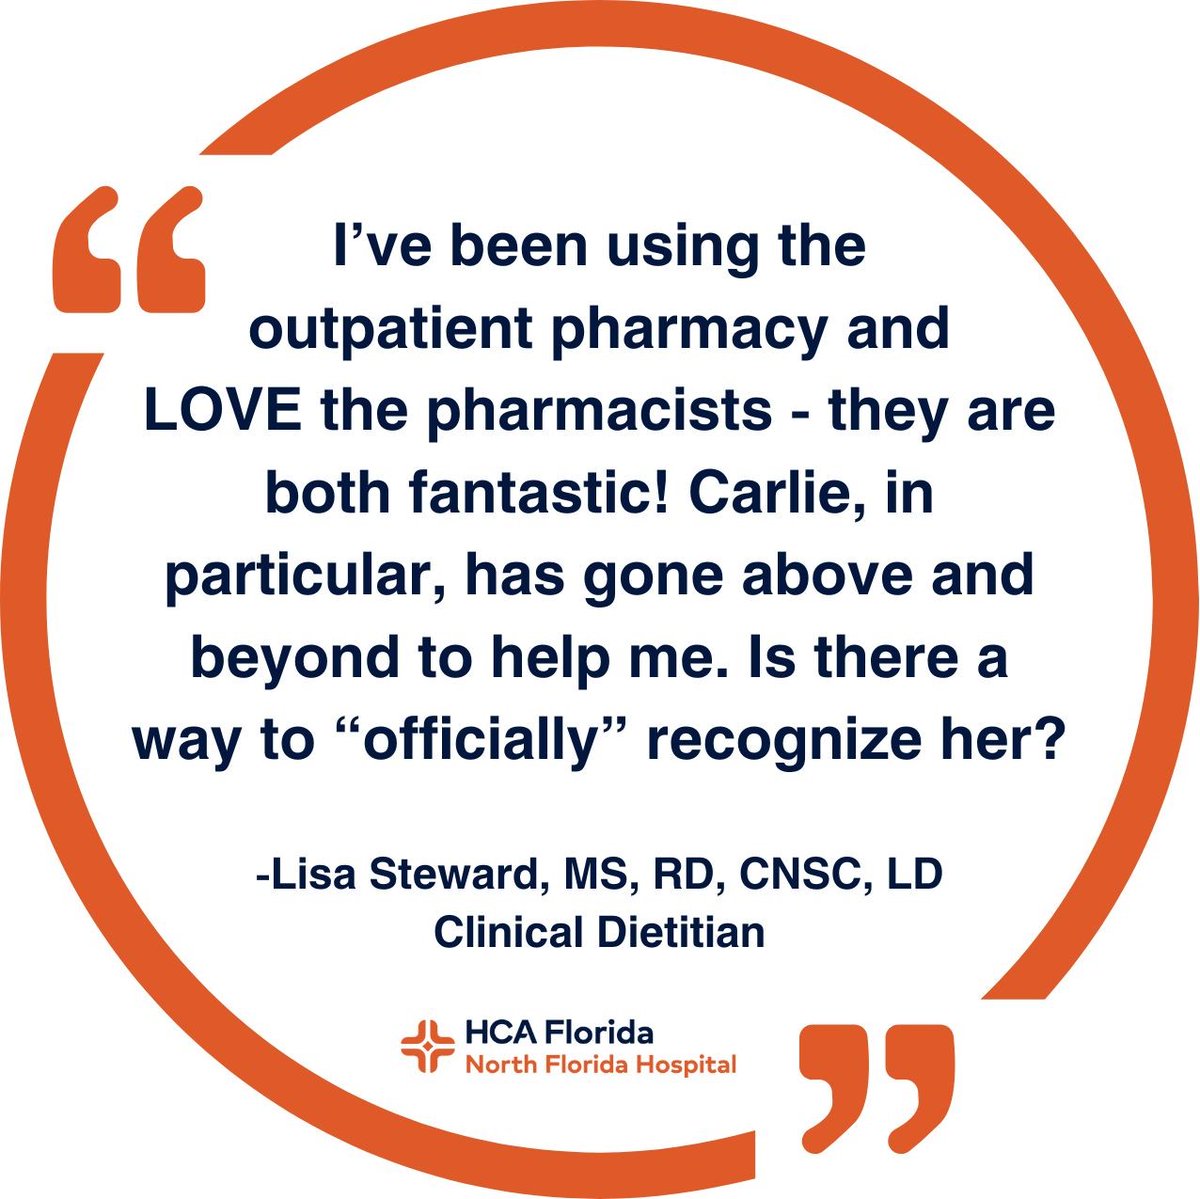 There is nothing we love more than recognizing the excellent care provided by our team members. Way to go @HCAFLHealthcare (North Florida Hospital​ Outpatient Pharmacy team), and keep up the amazing work, Carlie!